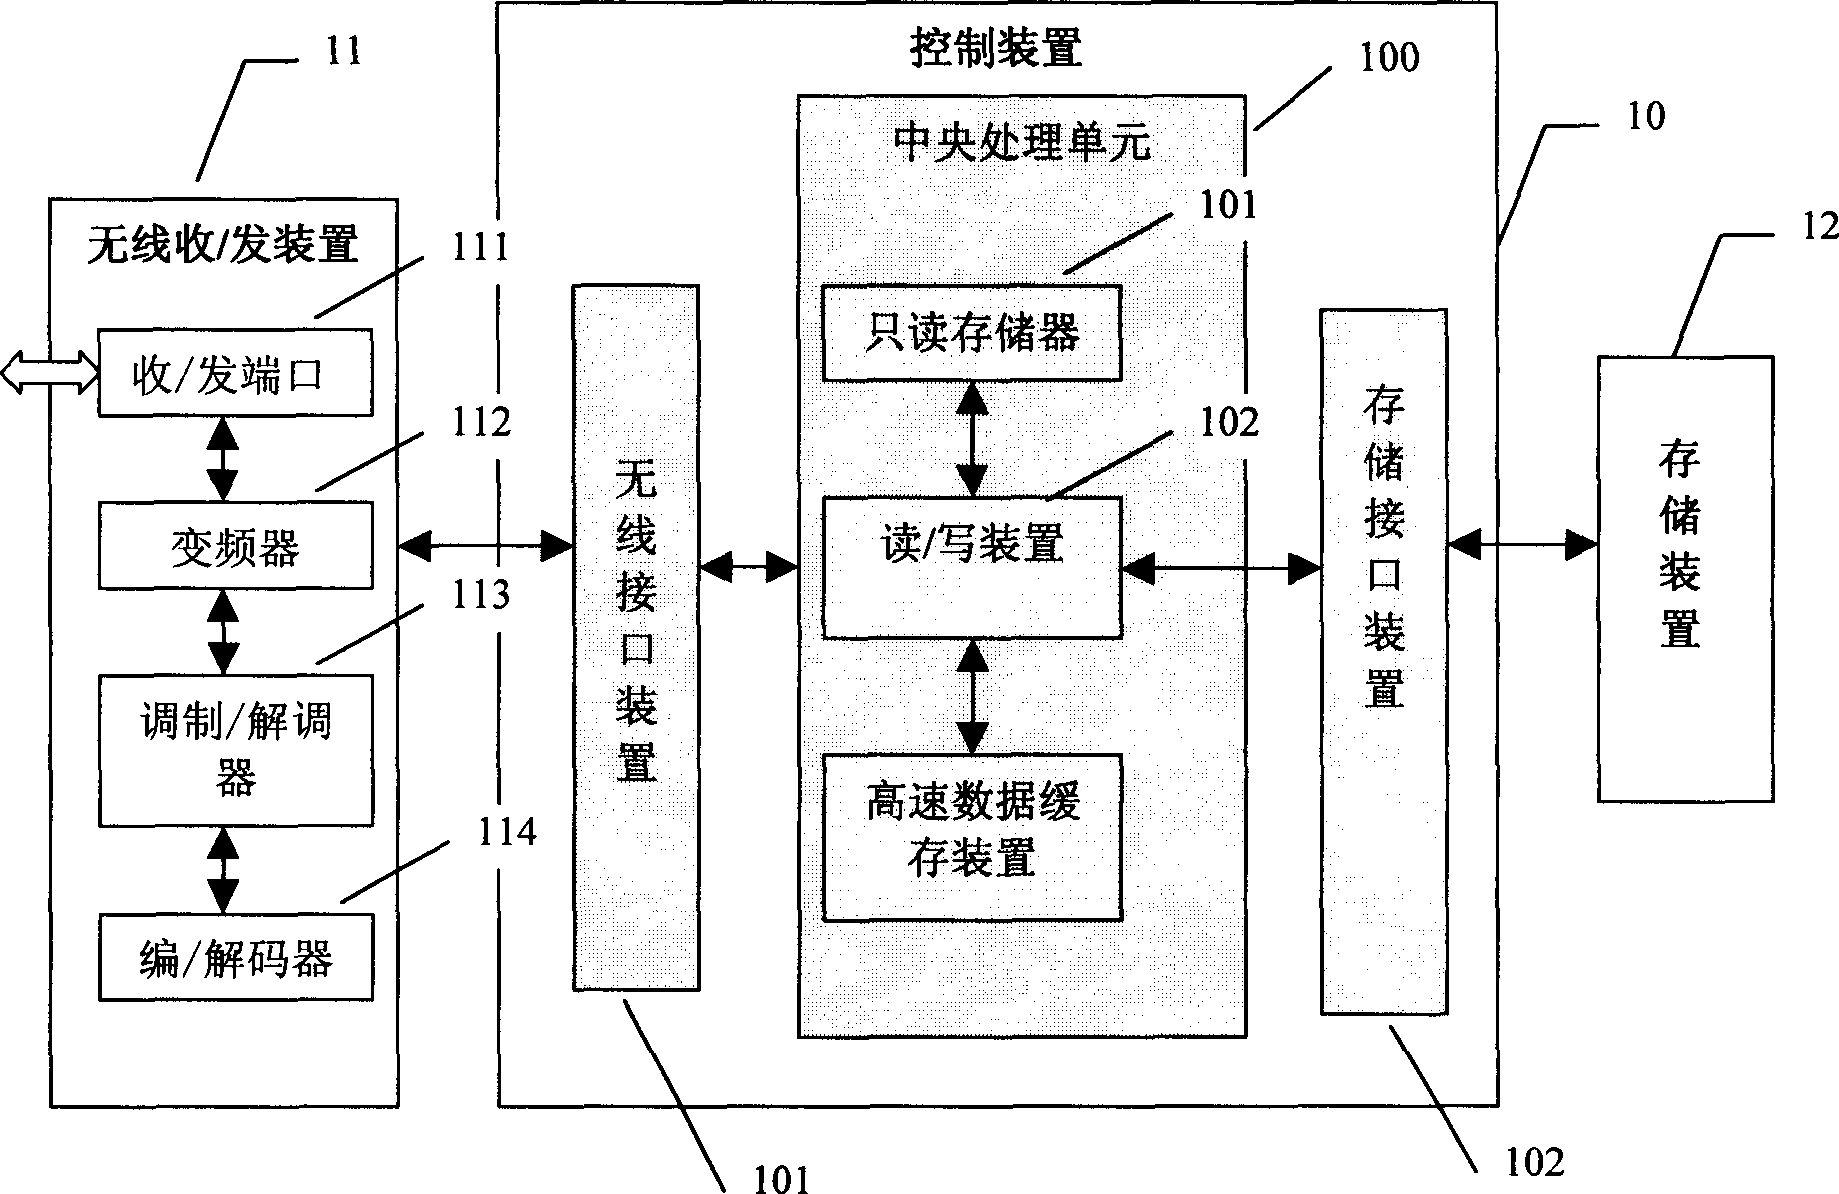 Data storage device and access method for its internal data